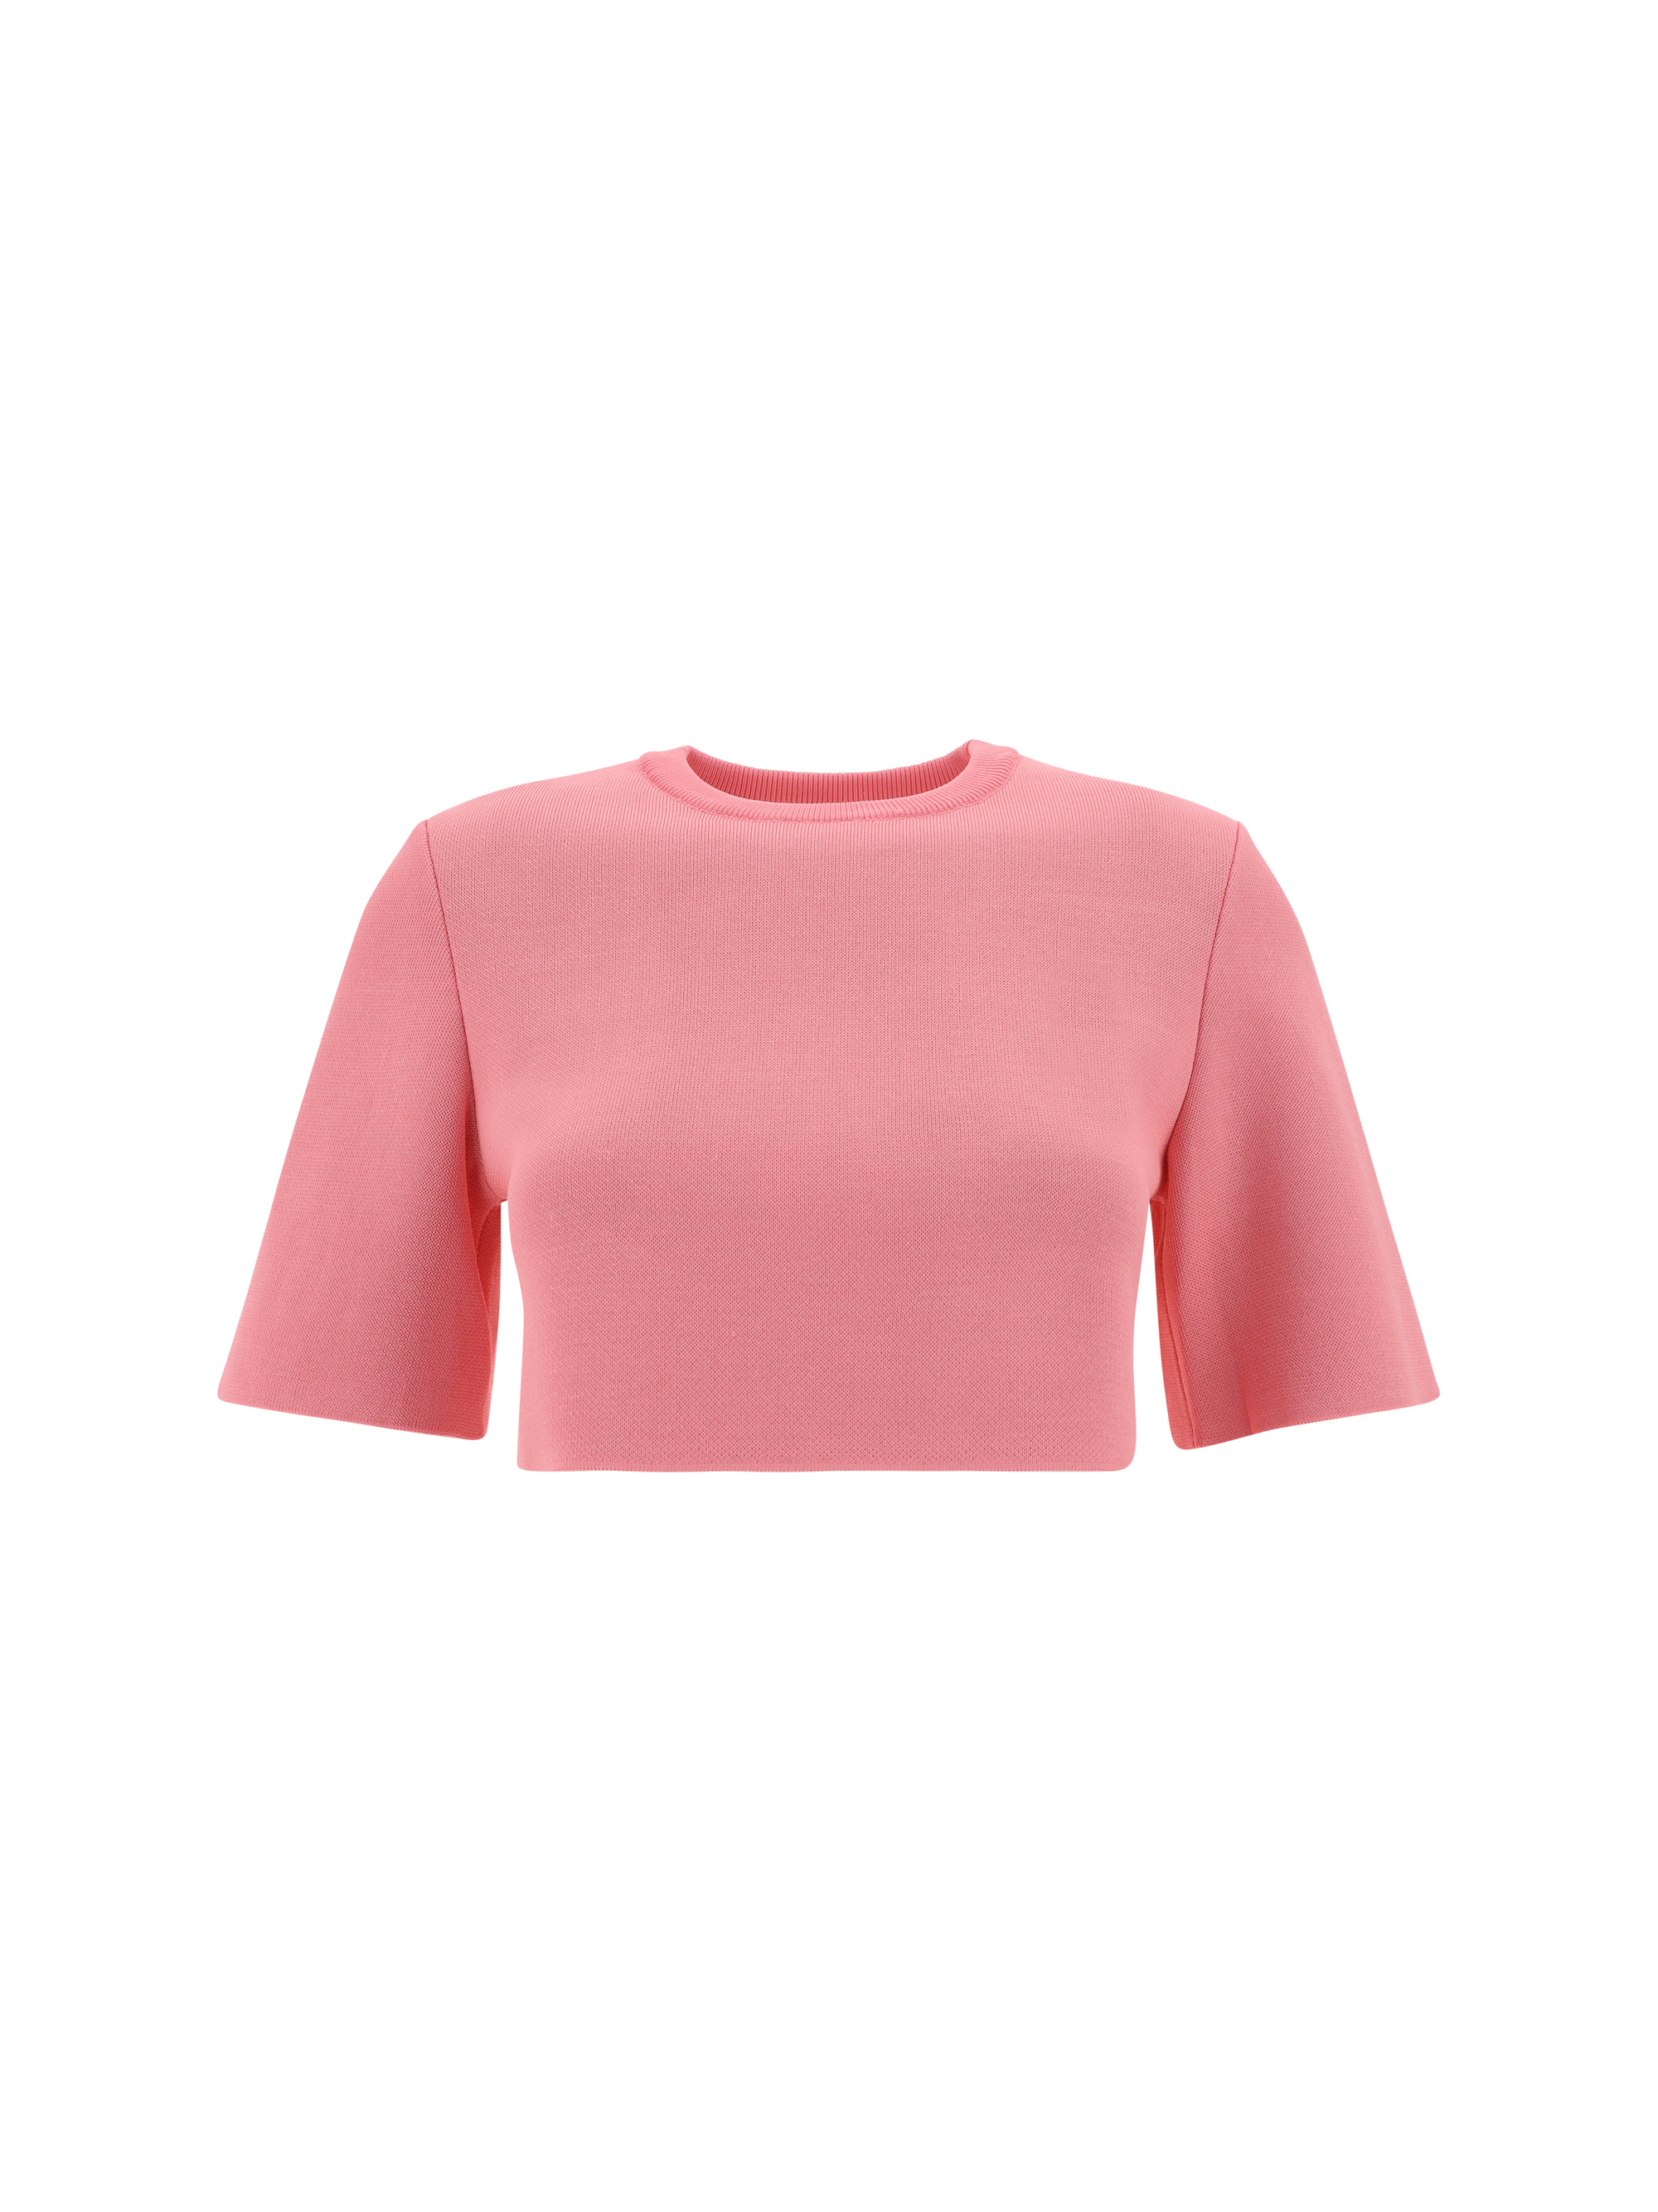 Loewe Reproportioned Top In Coral Pink